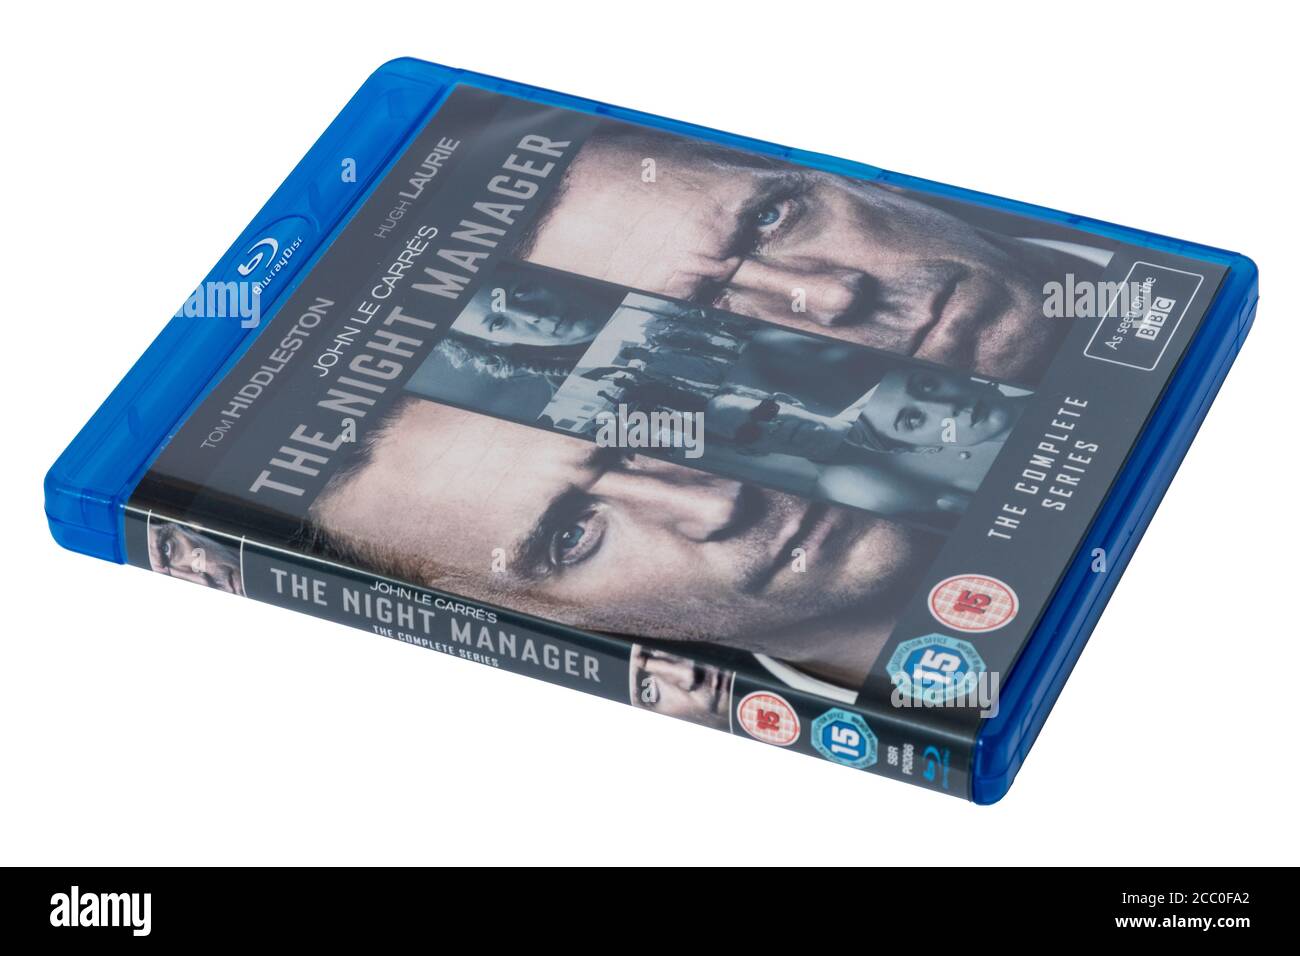 The Night Manager, a British television series on blue-ray disc Stock Photo